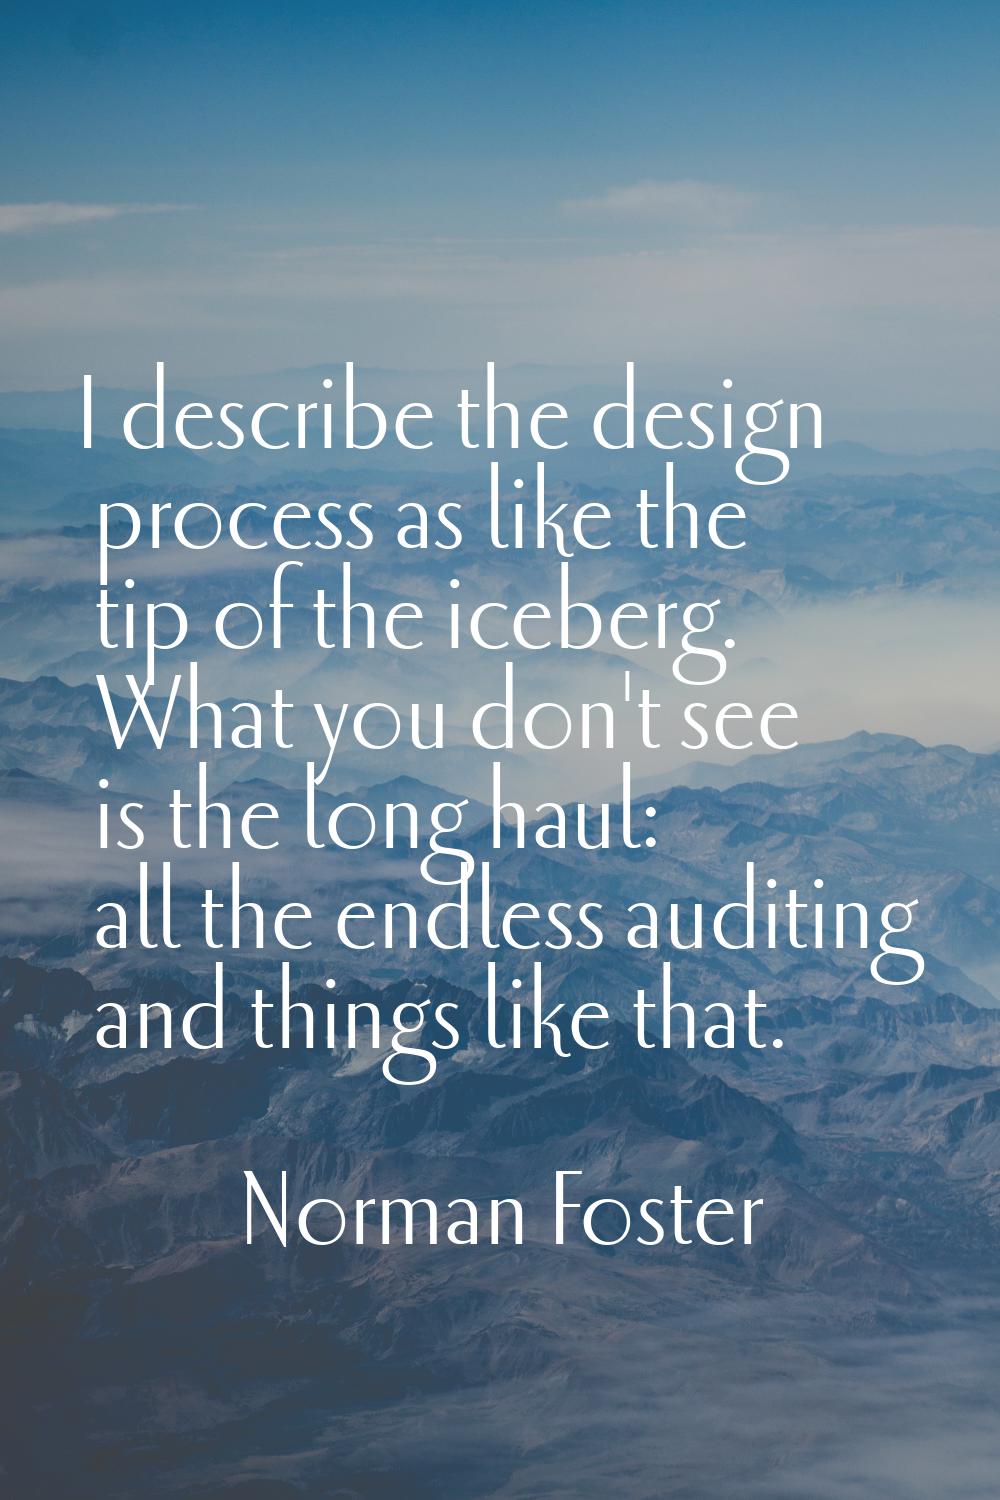 I describe the design process as like the tip of the iceberg. What you don't see is the long haul: 